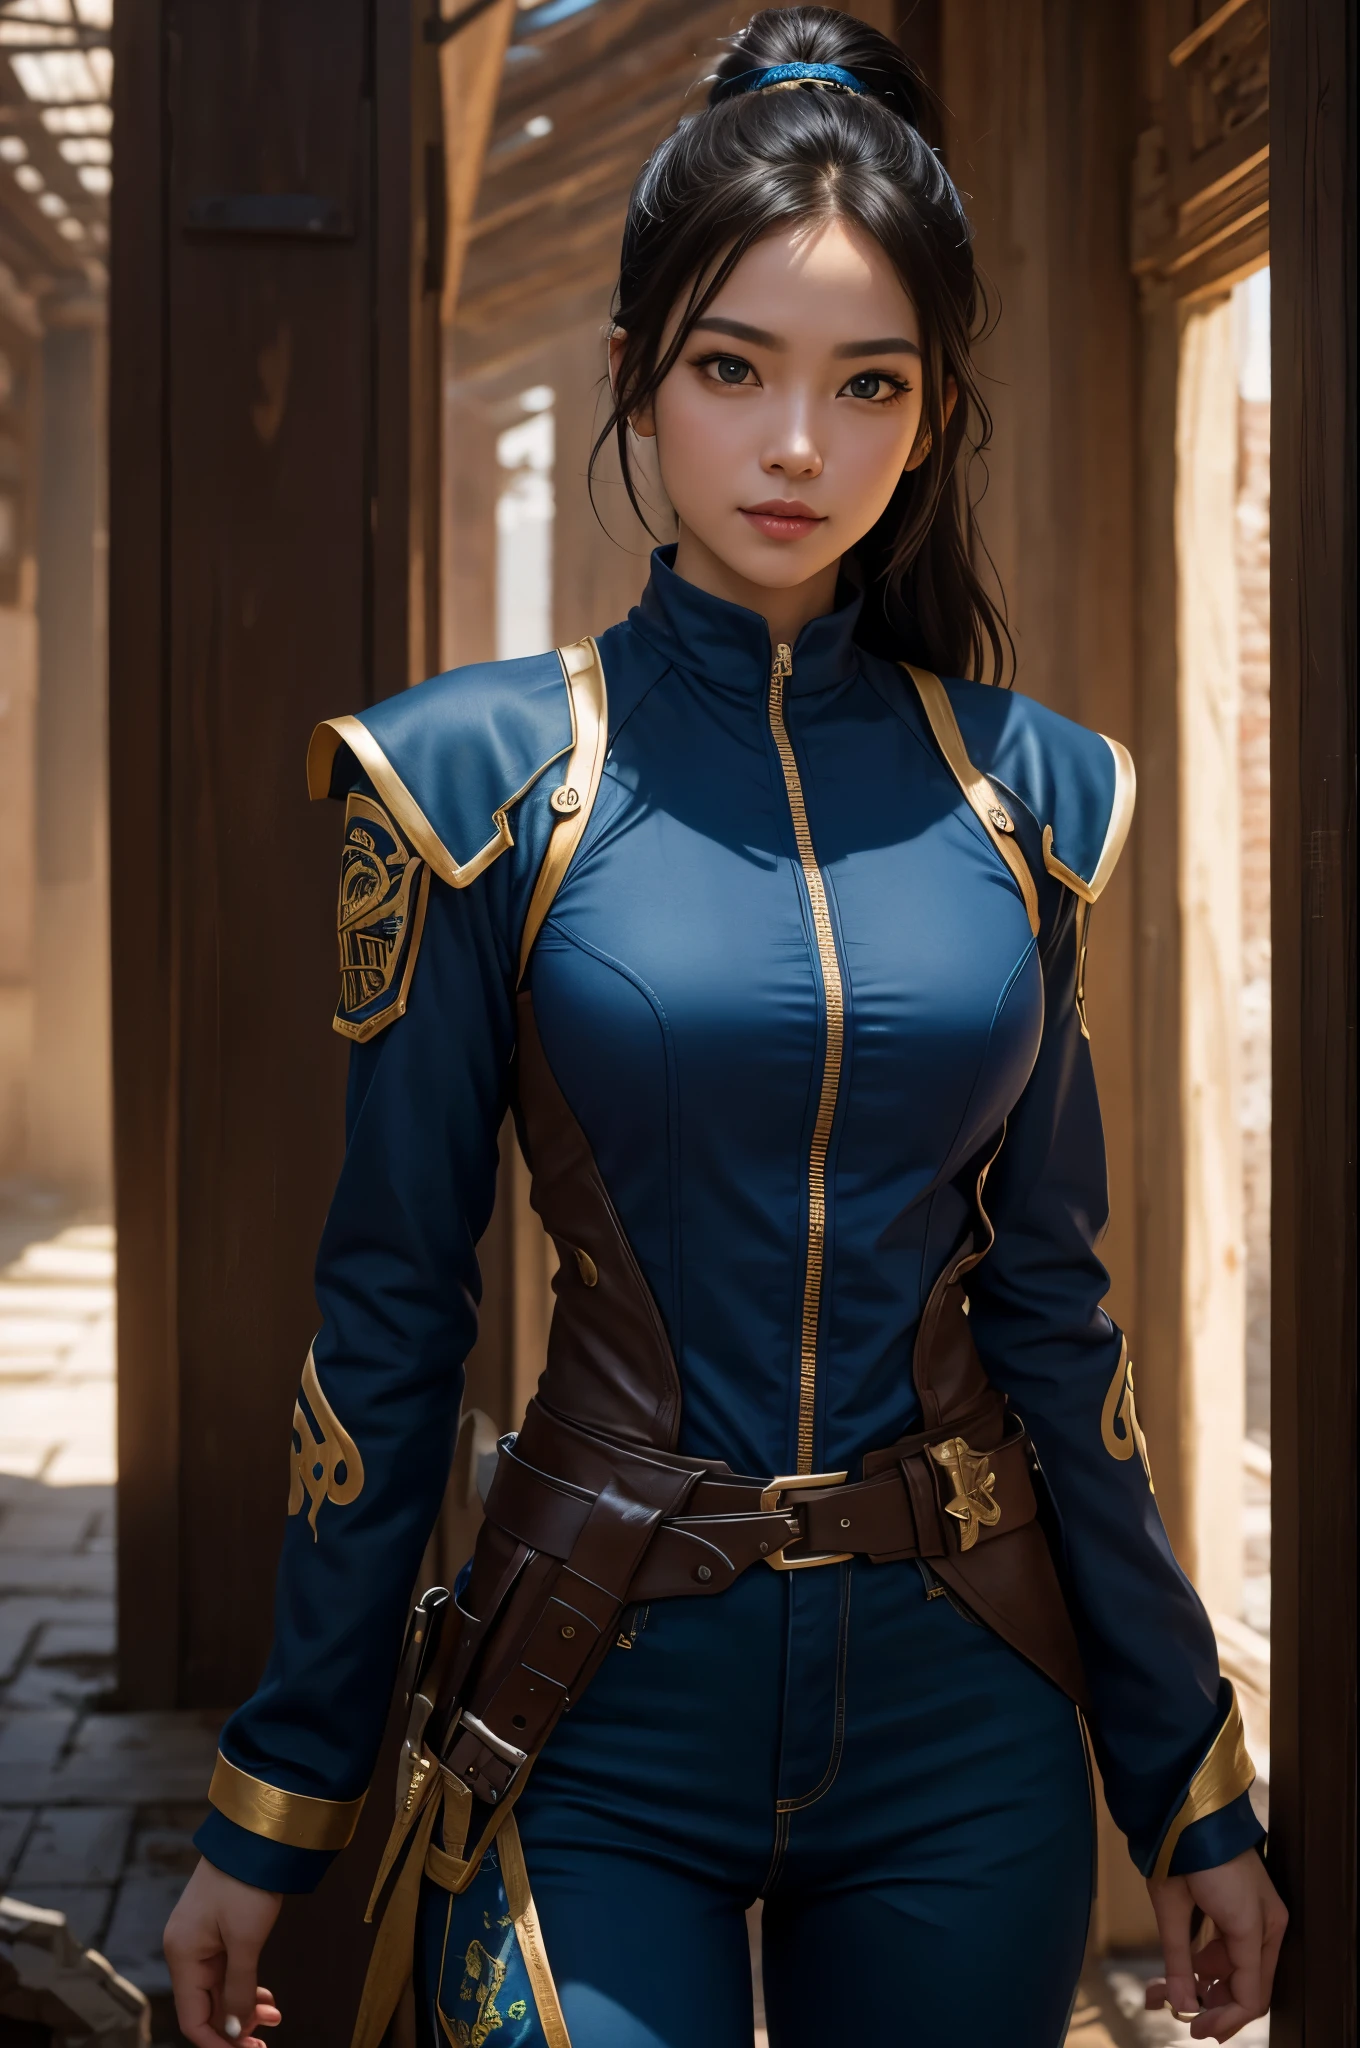 8K,The younger sister of twin sisters wearing casual clothes,Super beautiful(like the real thing),super realistic skin,My sister is tall and has a muscular, slim body.,Violent and strongly cracked abdominal muscles,small breasts,blue sexy combat uniform,Big eyes,black eyes,Light brown-haired ponytail,fancy makeup,blue combat pants,blue jacket,smile,masterpiece,Photorealistic RAW photos of the highest quality。bright colors,rich colors, Backlight, cinematic lighting, film grain, to be born, 50mm lens, Nikon D850,detailed character art,fantasy art,ultra high resolution,super realistic skin,Perfect hand shape,In front of the abandoned temple,beautiful expression,Blue Gauntlet,